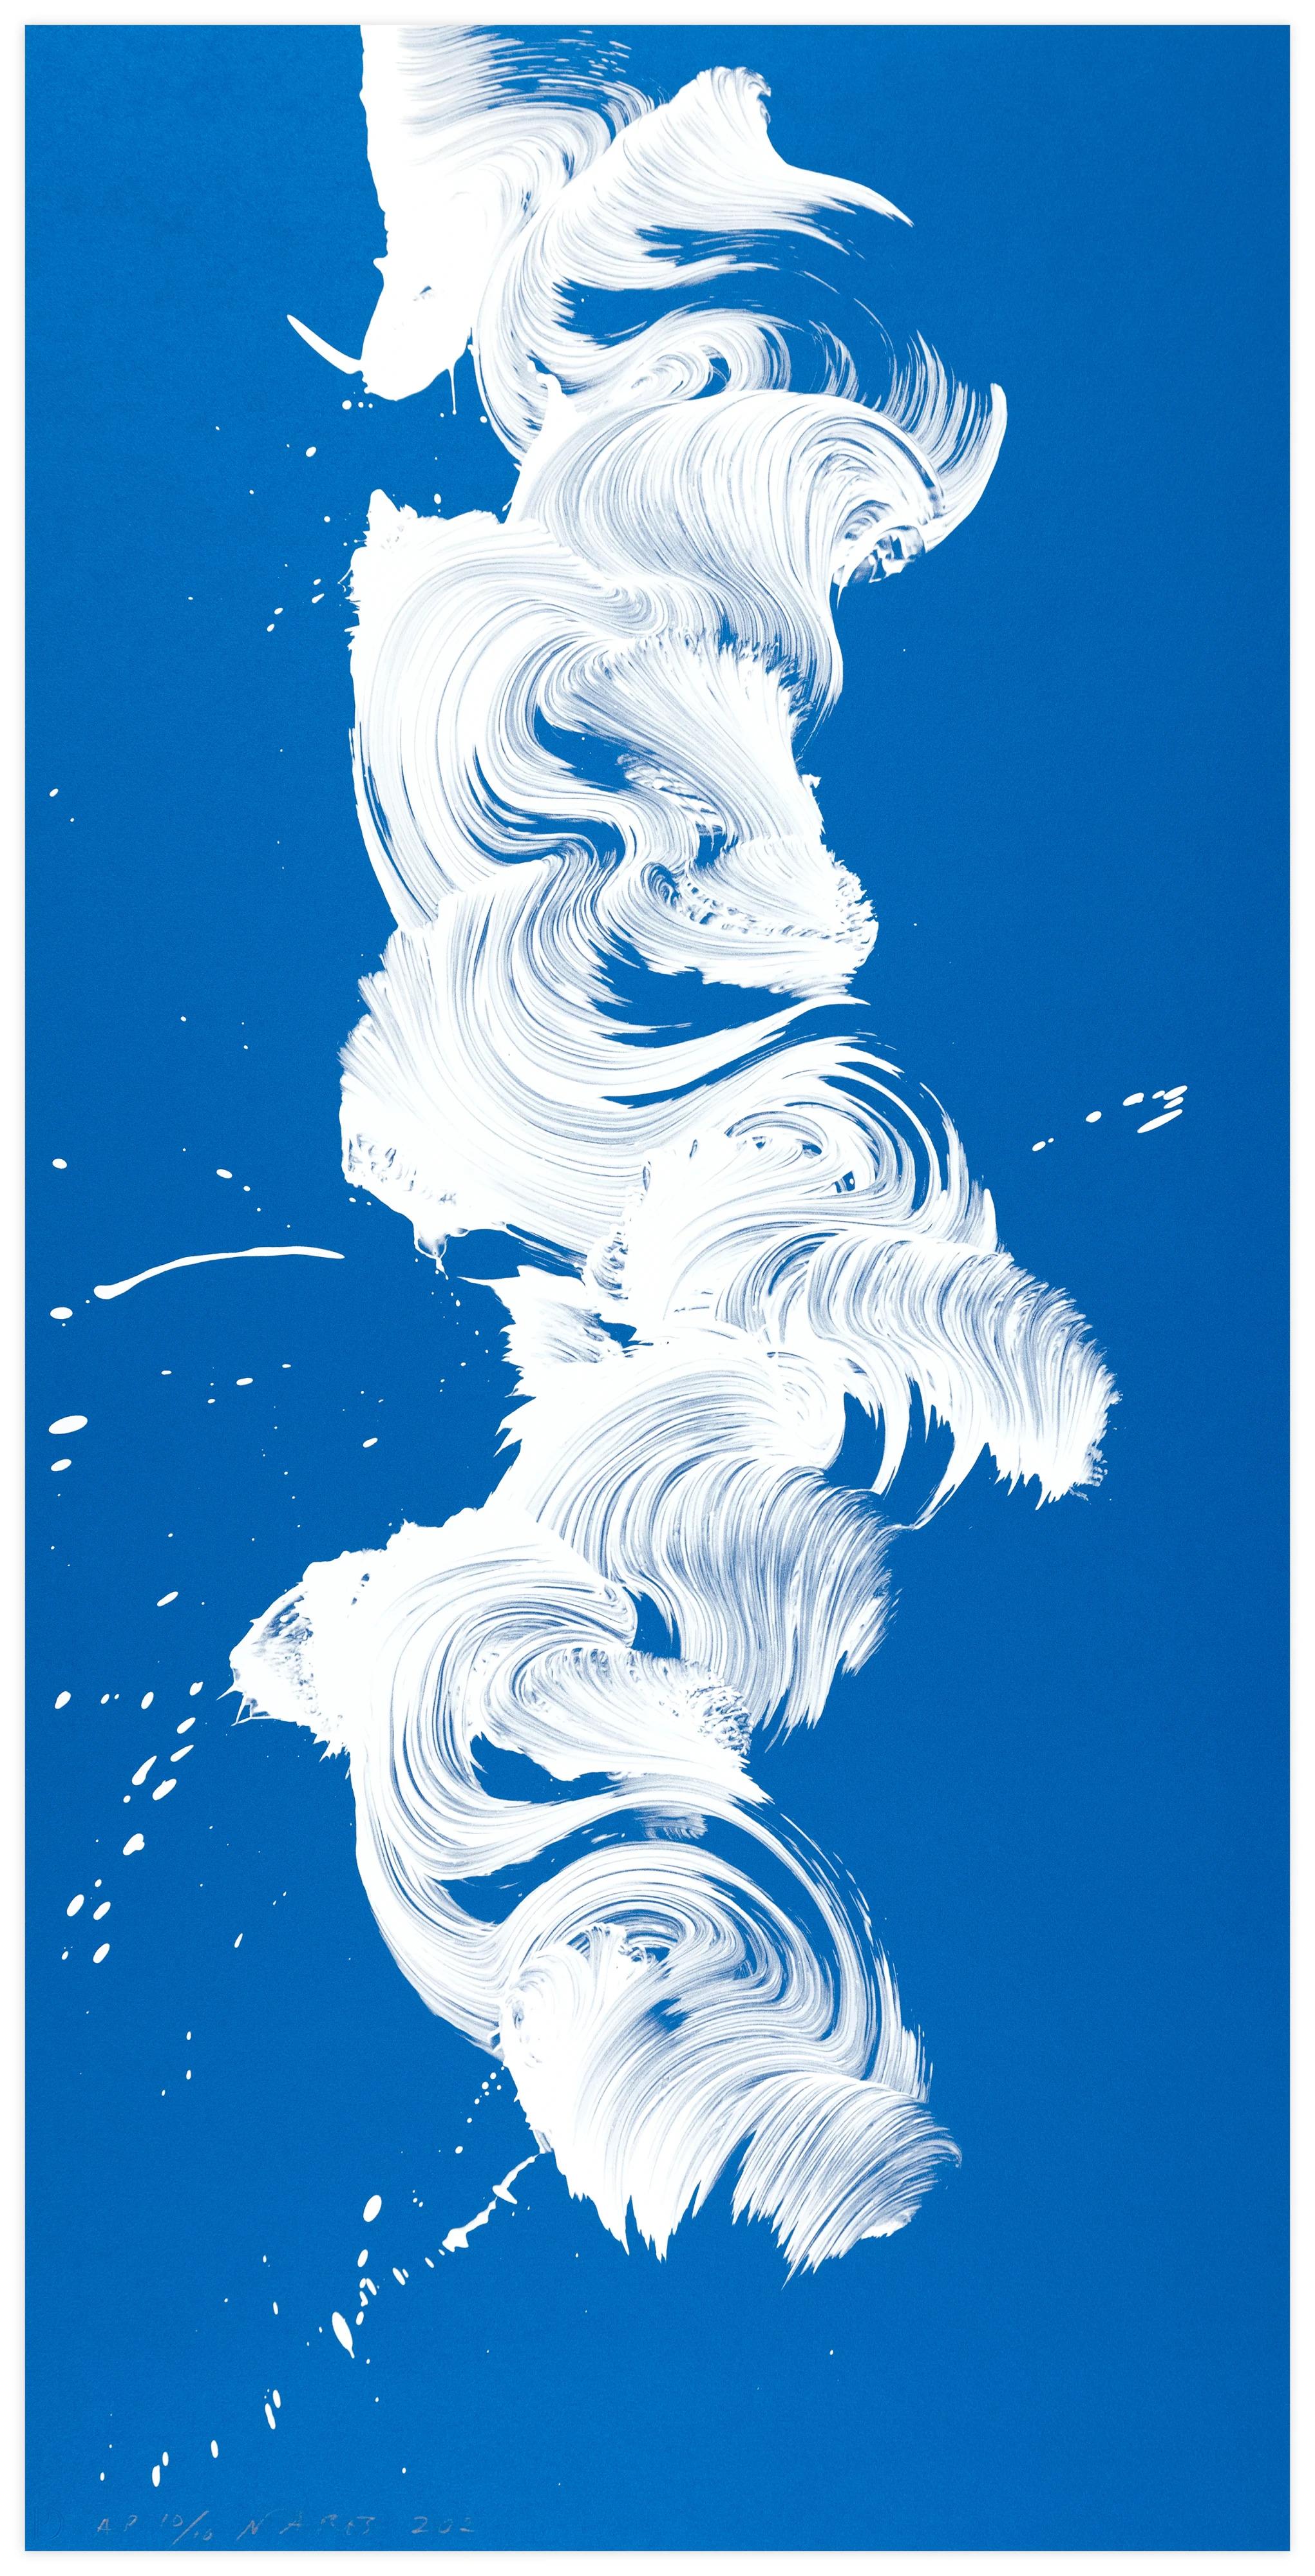 Abstract Print James Nares - Particle et onde 1